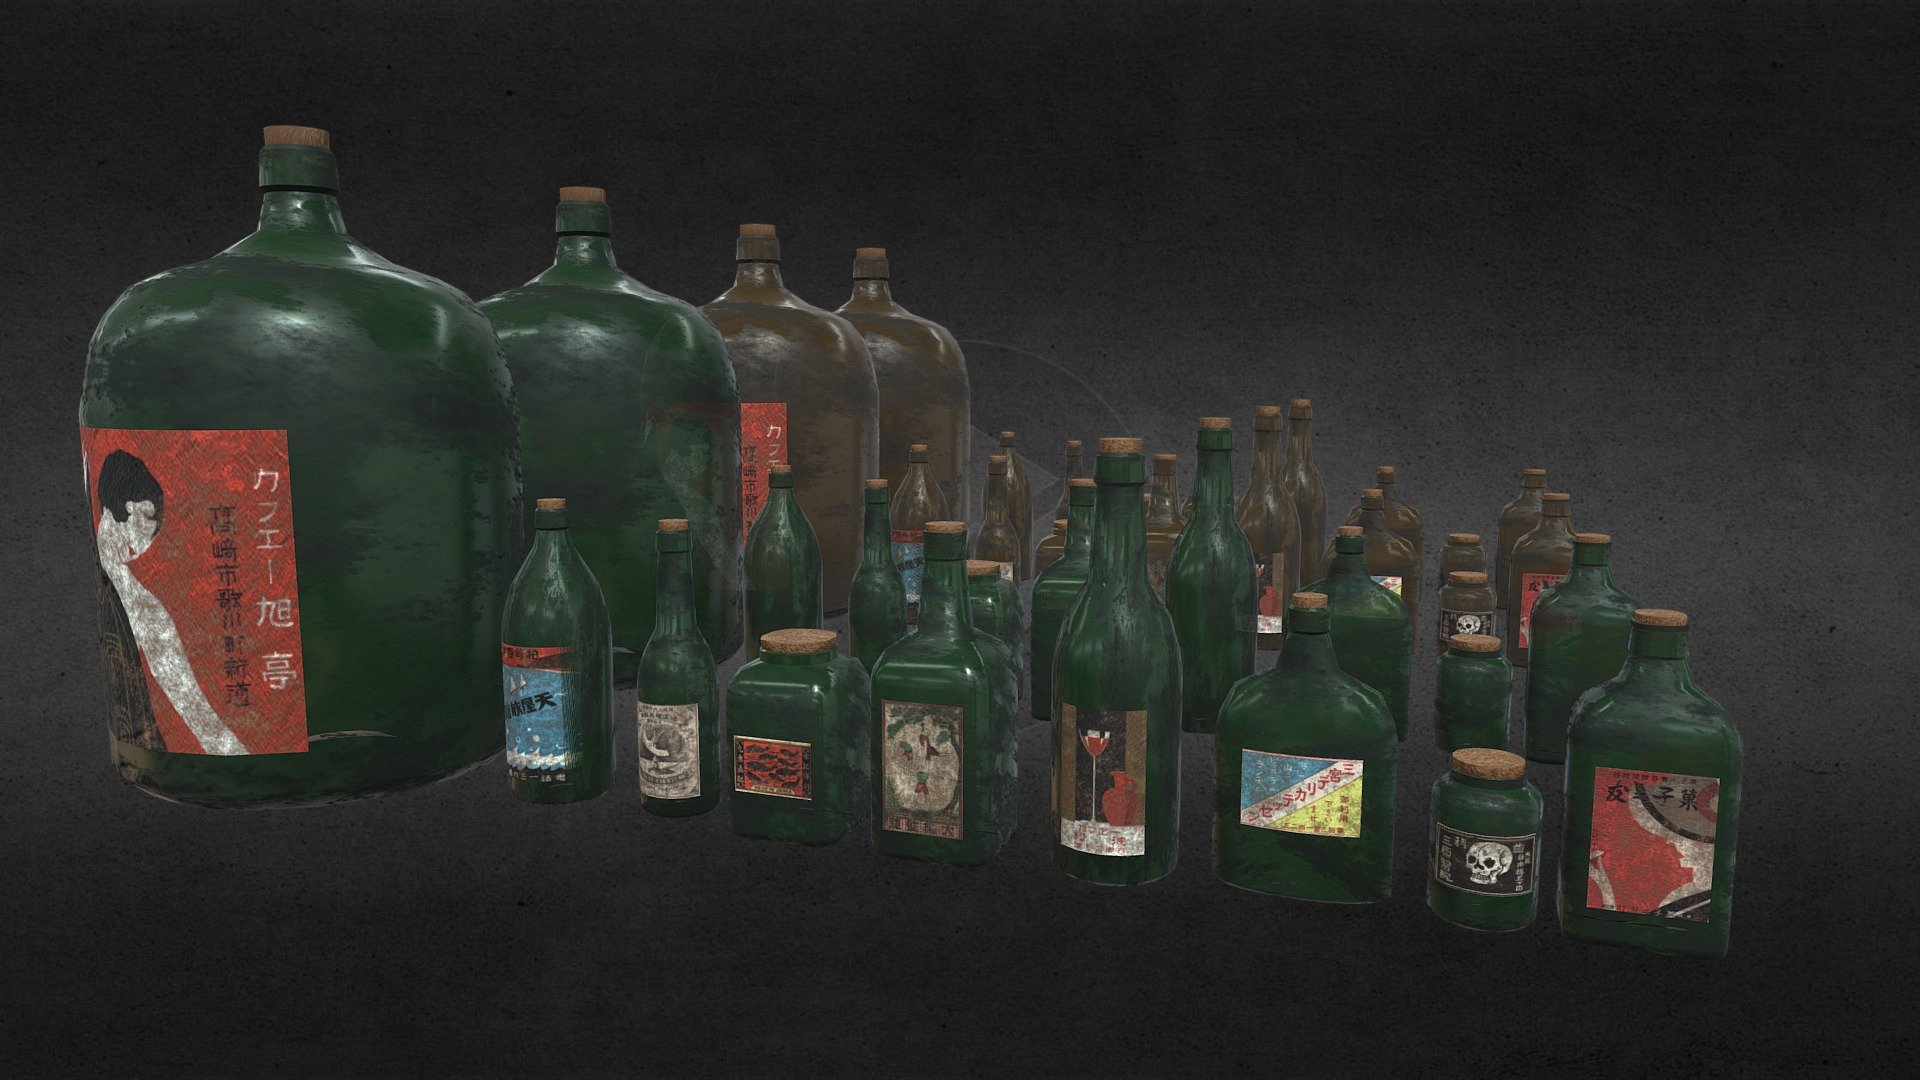 A set of low-poly glass bottles that I made for my upcoming game, Shinrin Yoku. This model is seperated into multiple individual objects so that you can put them anywhere you'd like and arrange them in your scene.

There are 3 seperate materials that are used for these models so that transparency can be applied to the glass. You can also easily replace the labels by editing the Albedo Texture. If you don't want any dirt on the bottles, then simply replace the Albedo textures with a solid color and the glass will appear clean. 

Feel free to use these models in anyway you wish, just dont't claim ownership. Credit is not required, but is appreciated.

Follow me on Facebook, Instagram, or SketchFab to support me and keep up with future game releases 3d model